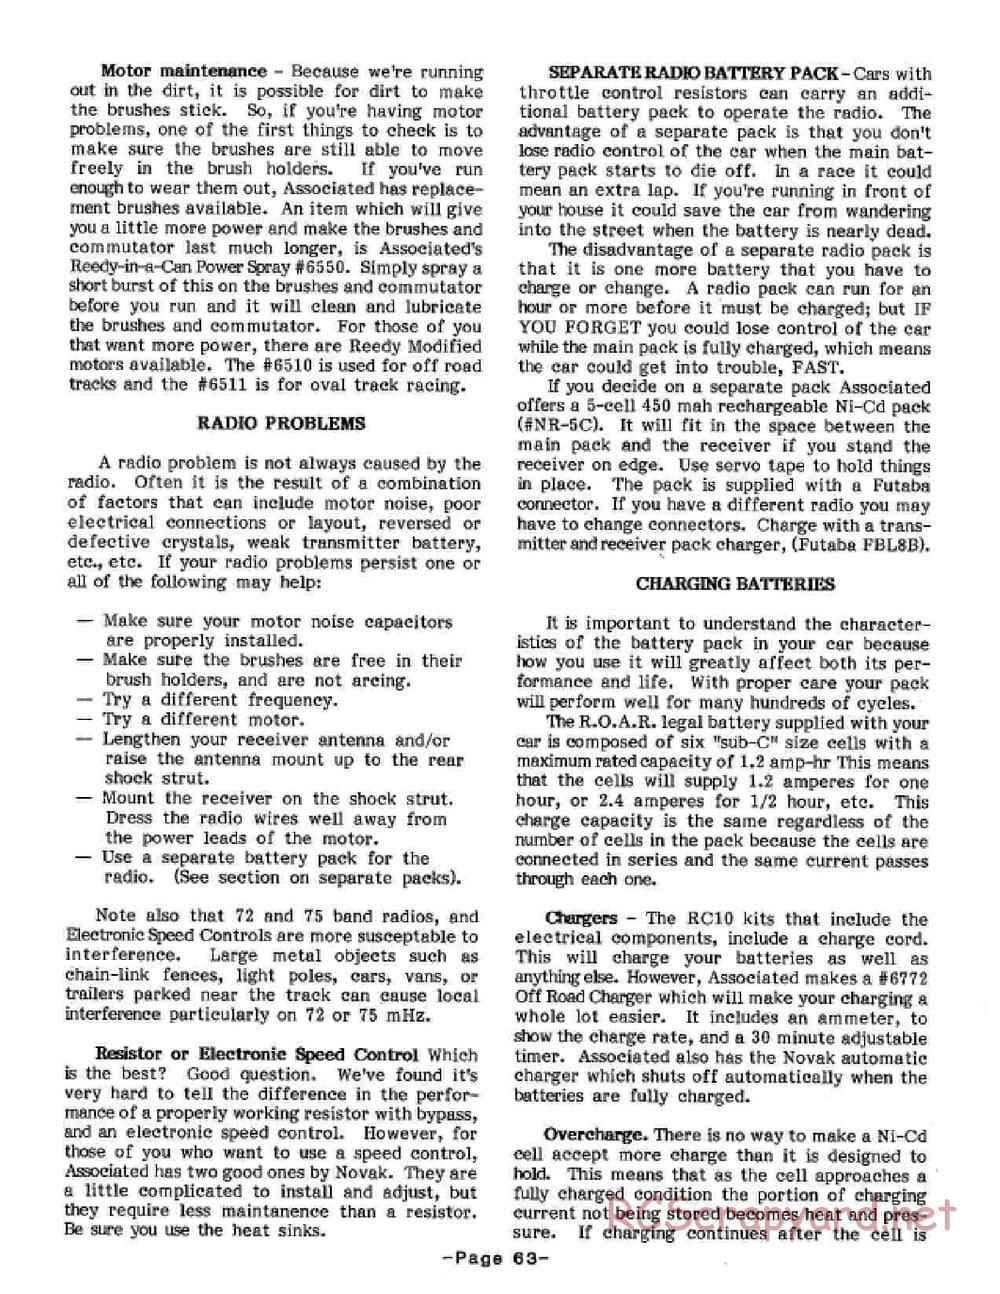 Team Associated - RC10 - 1986 Cadillac Manual - Page 65